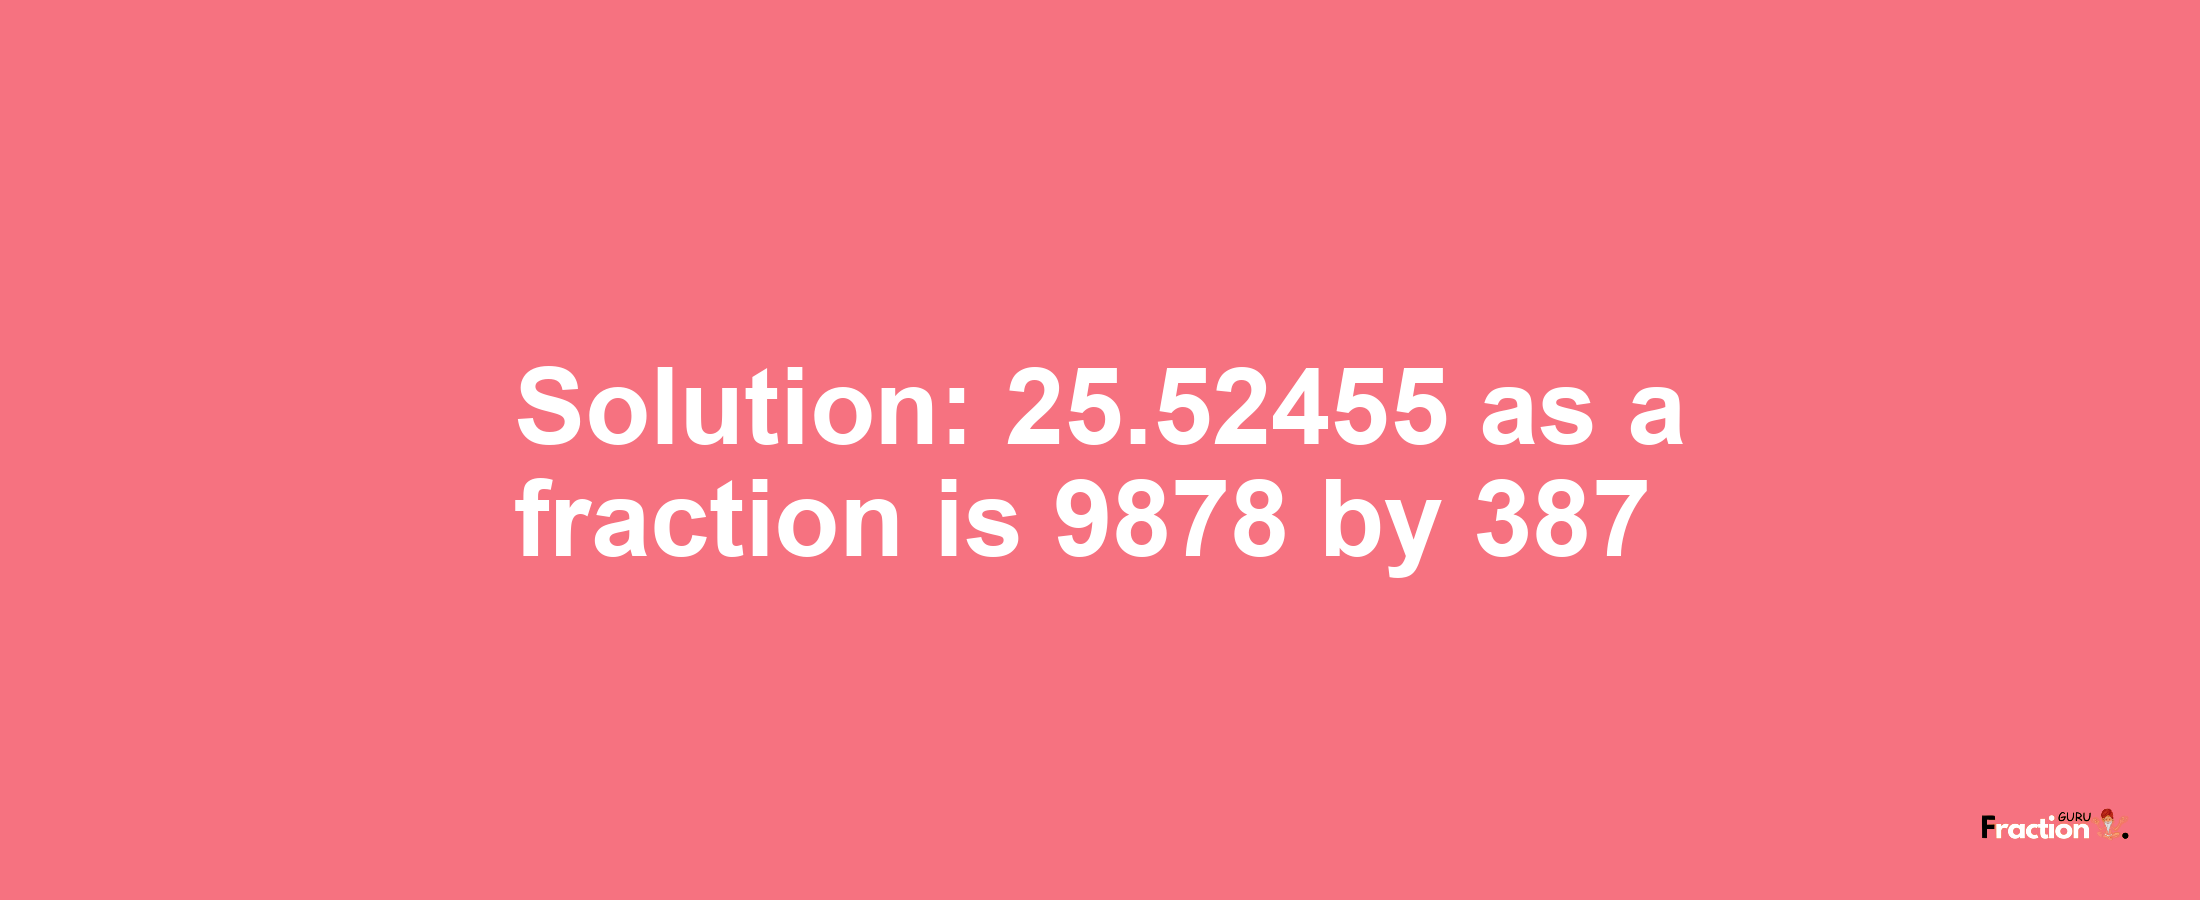 Solution:25.52455 as a fraction is 9878/387